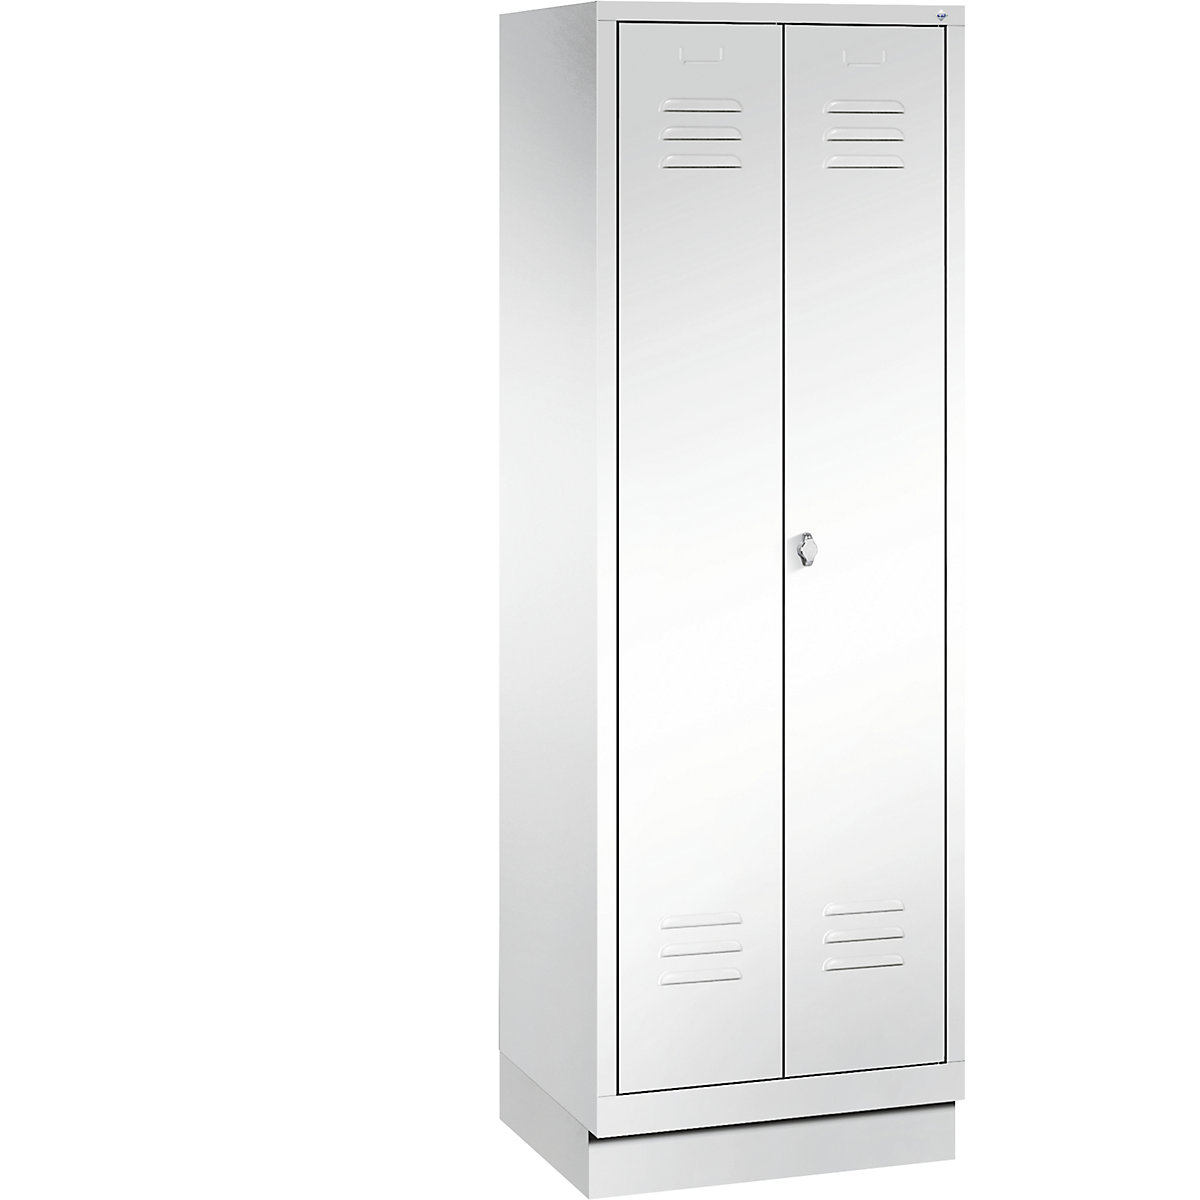 CLASSIC cloakroom locker with plinth, doors close in the middle - C+P